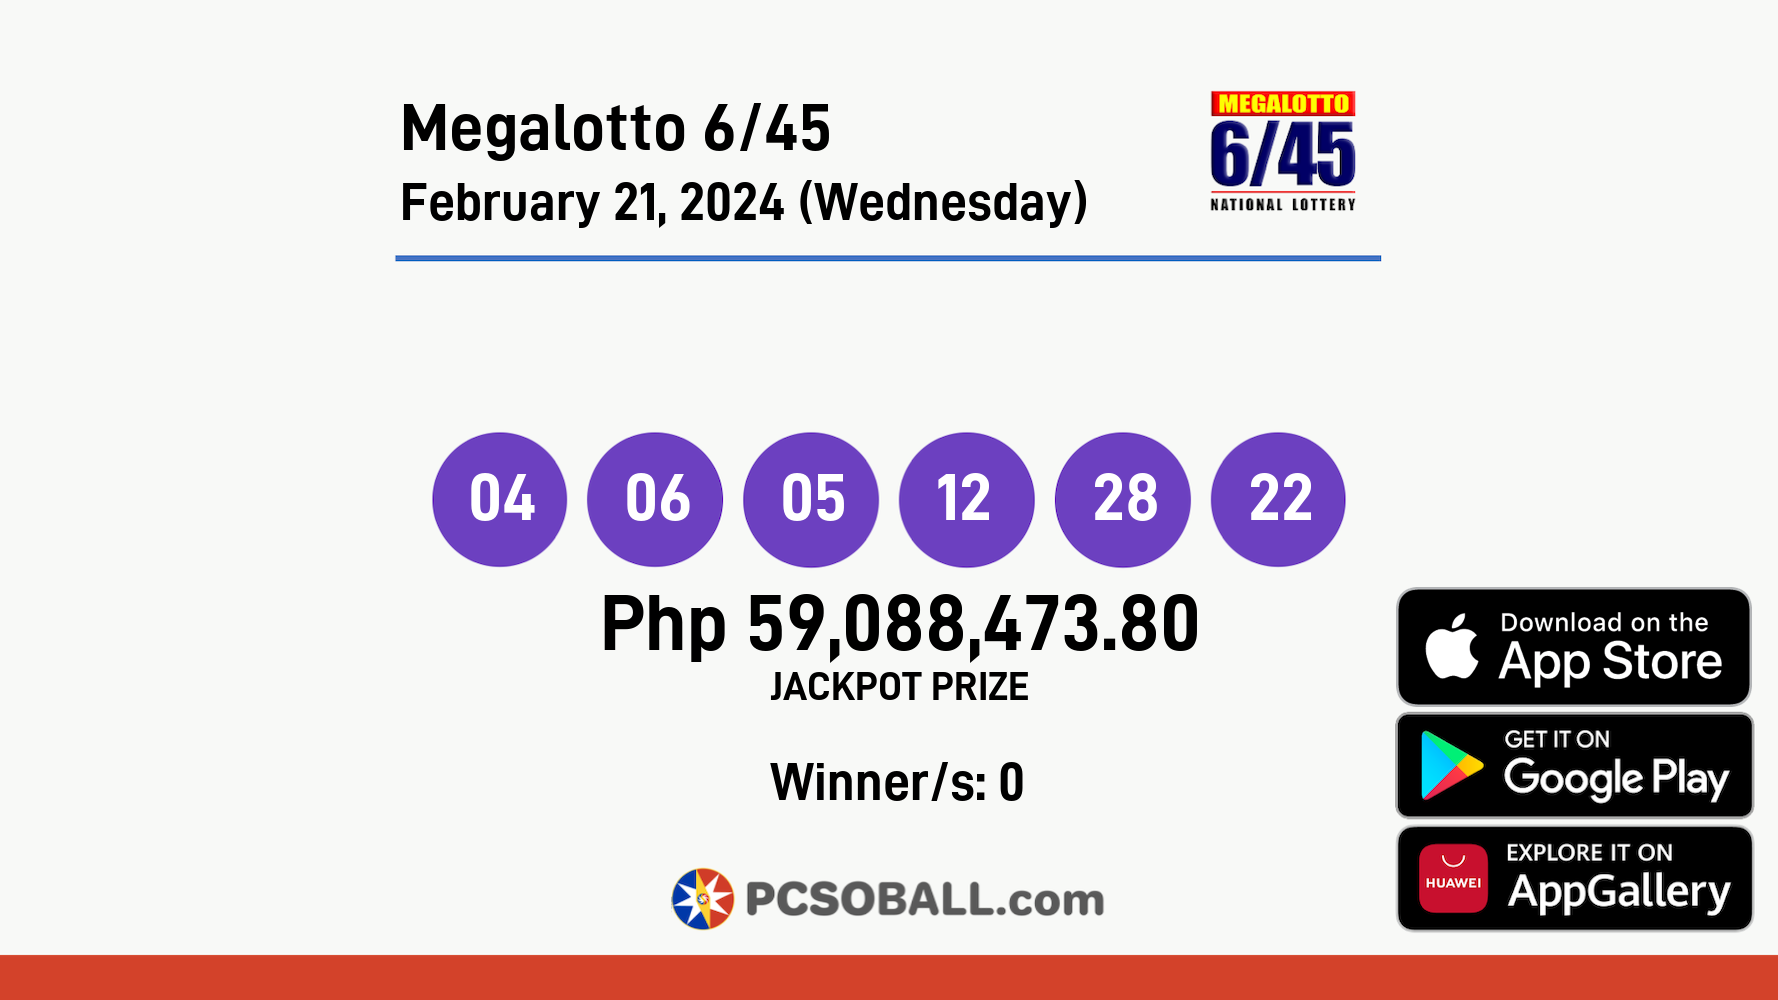 Megalotto 6/45 February 21, 2024 (Wednesday) Result